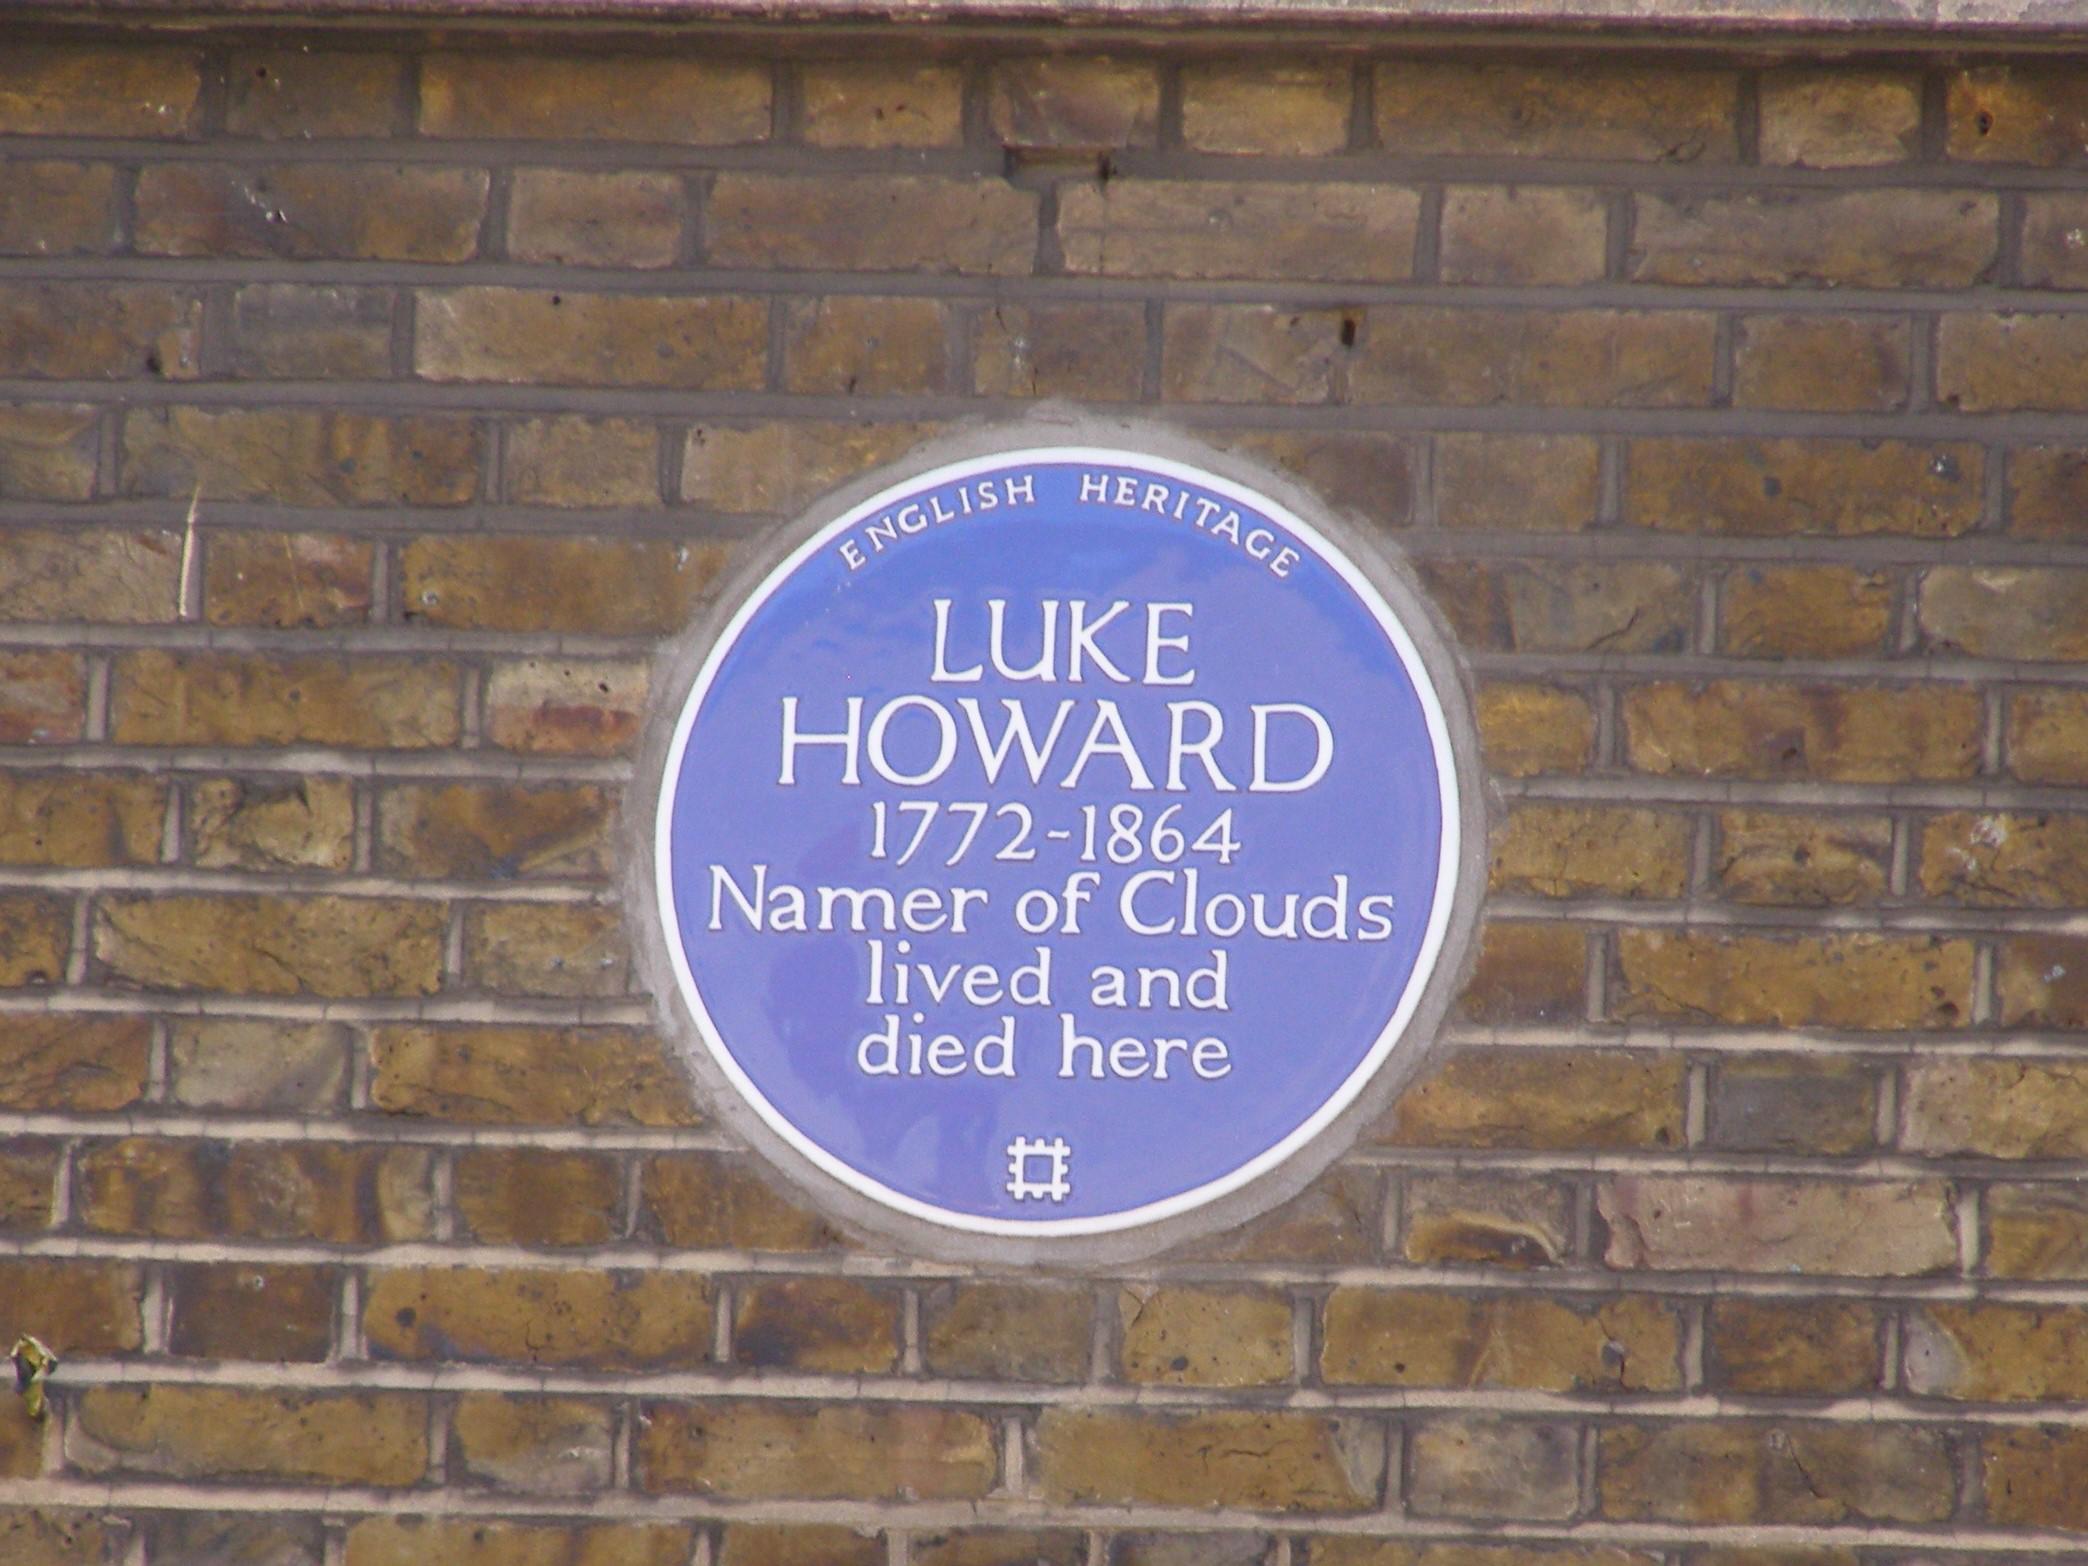 Luke Howard's blue plaque at his former home on Bruce Grove